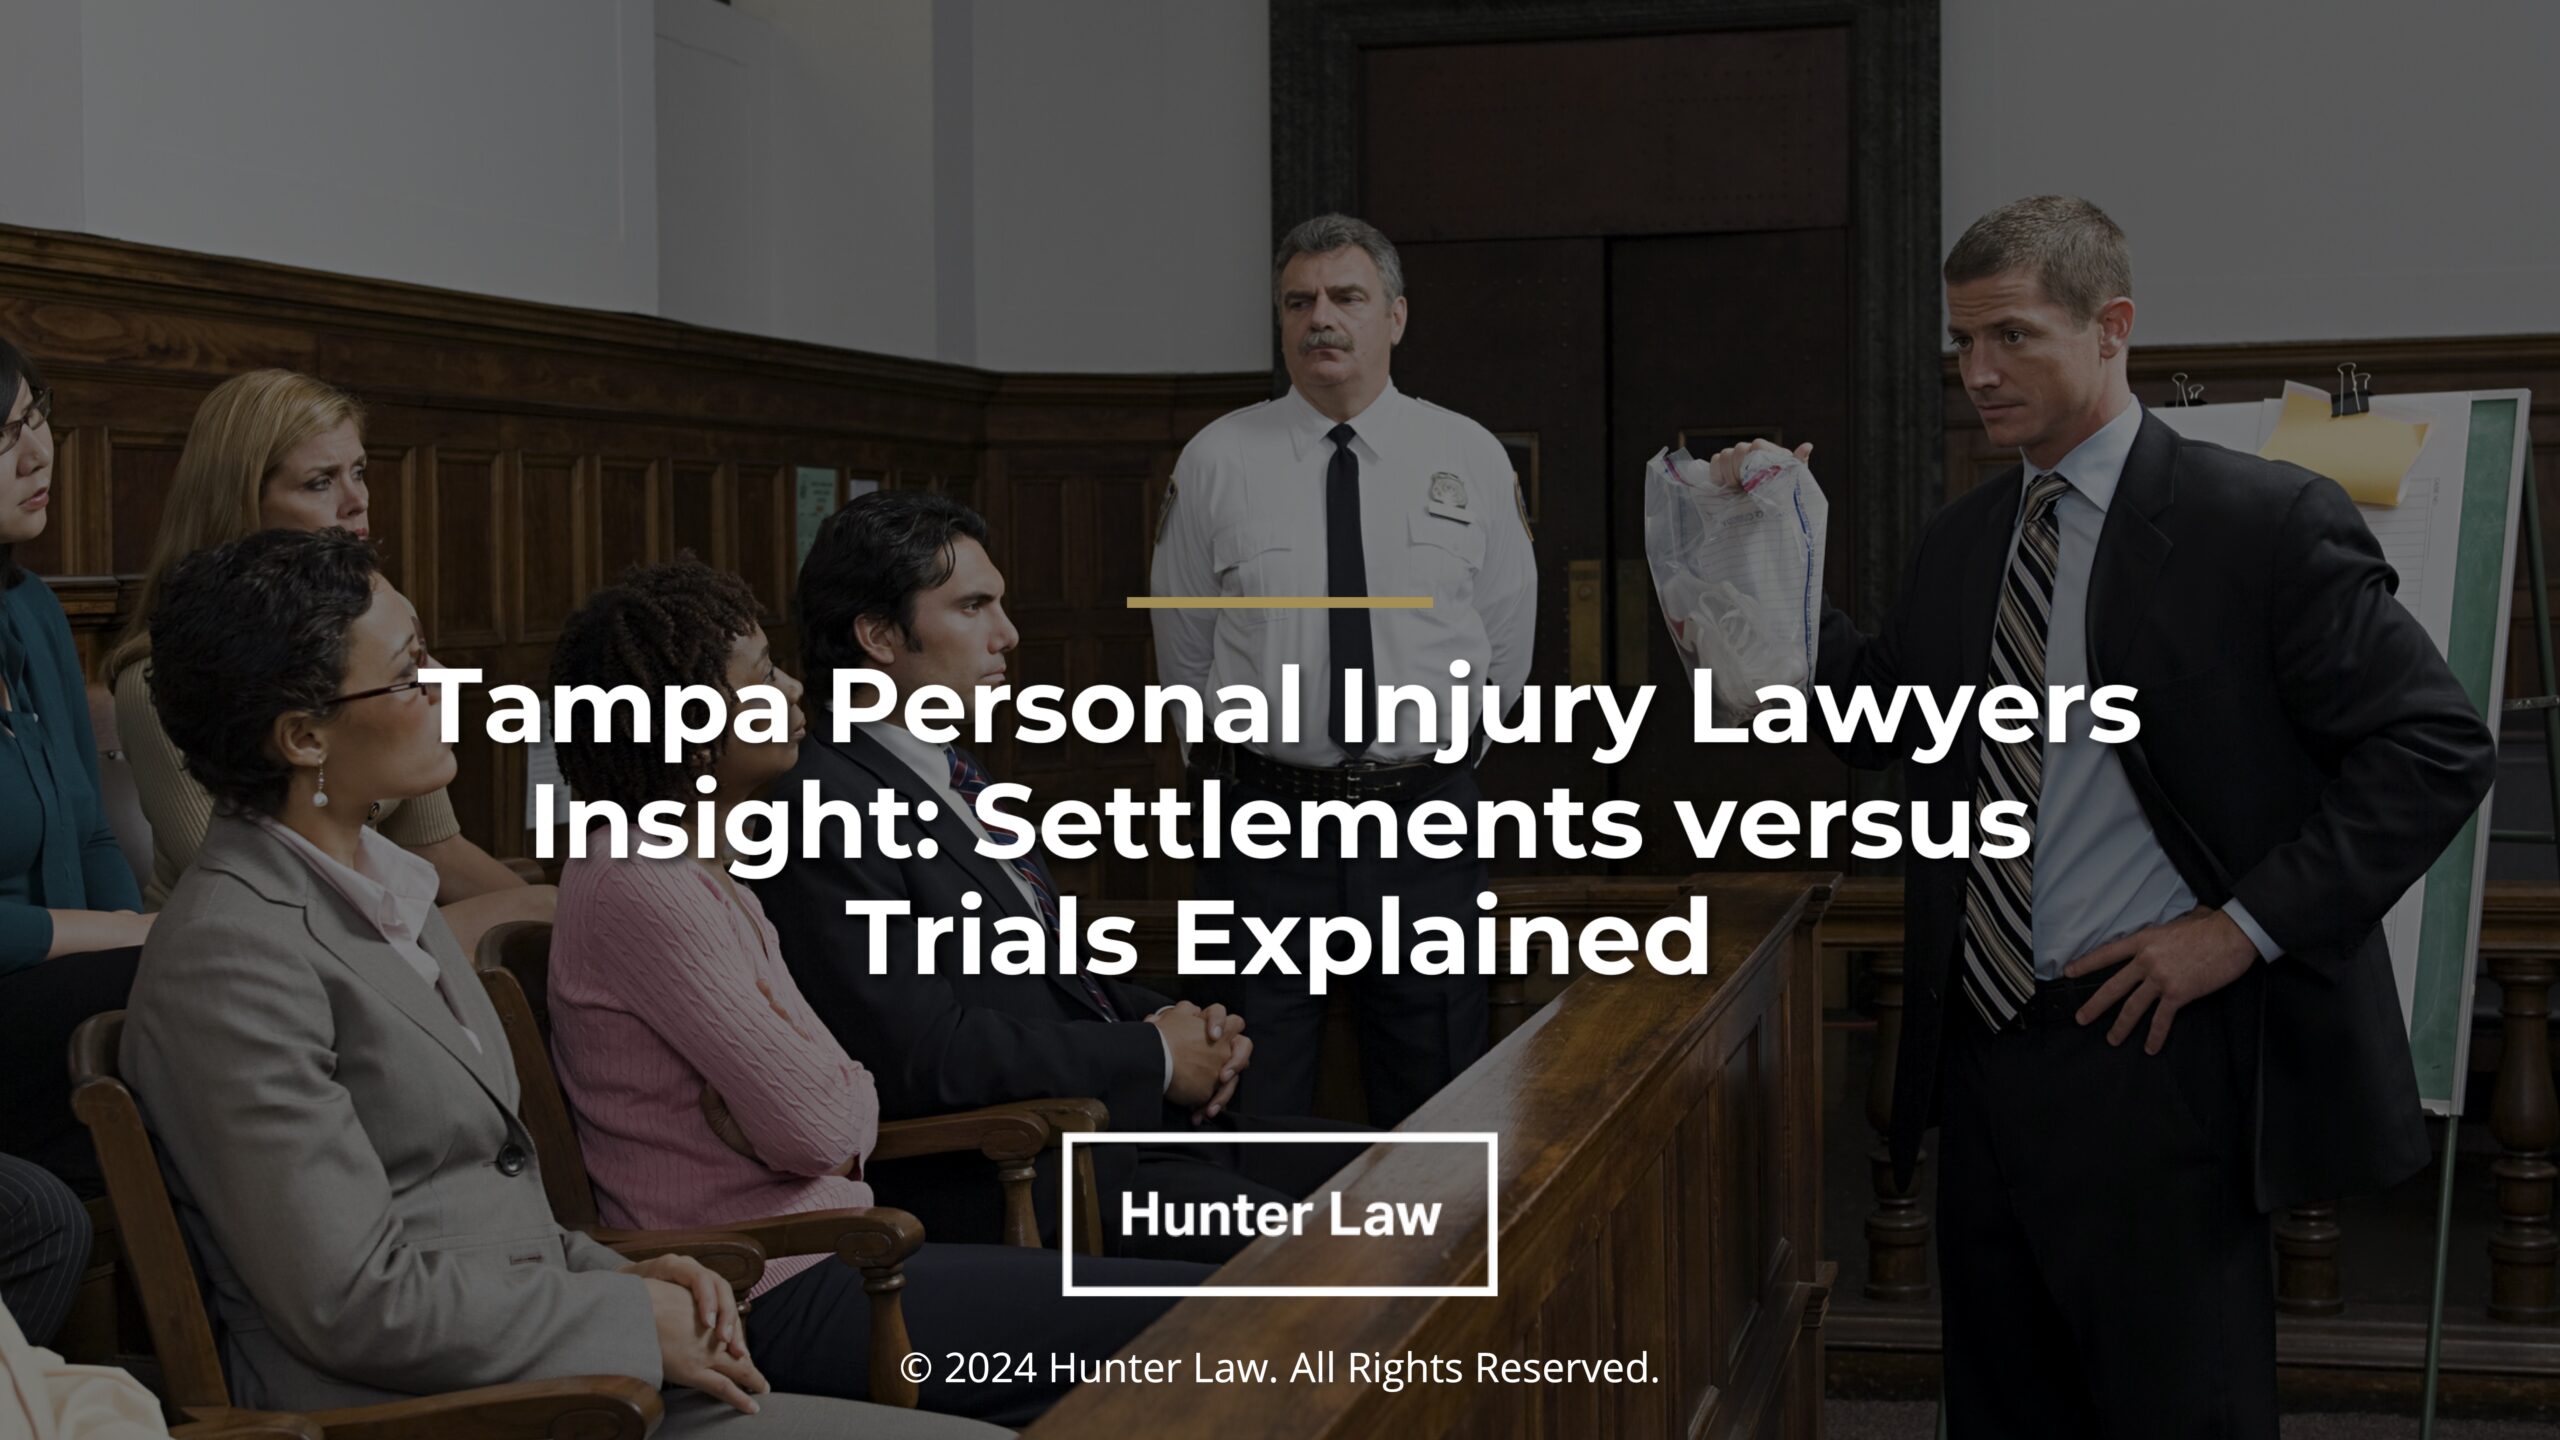 Featured: Lawyer addressing jury in court- Tampa Personal Injury Lawyers insights: Settlements vs. Trials explained